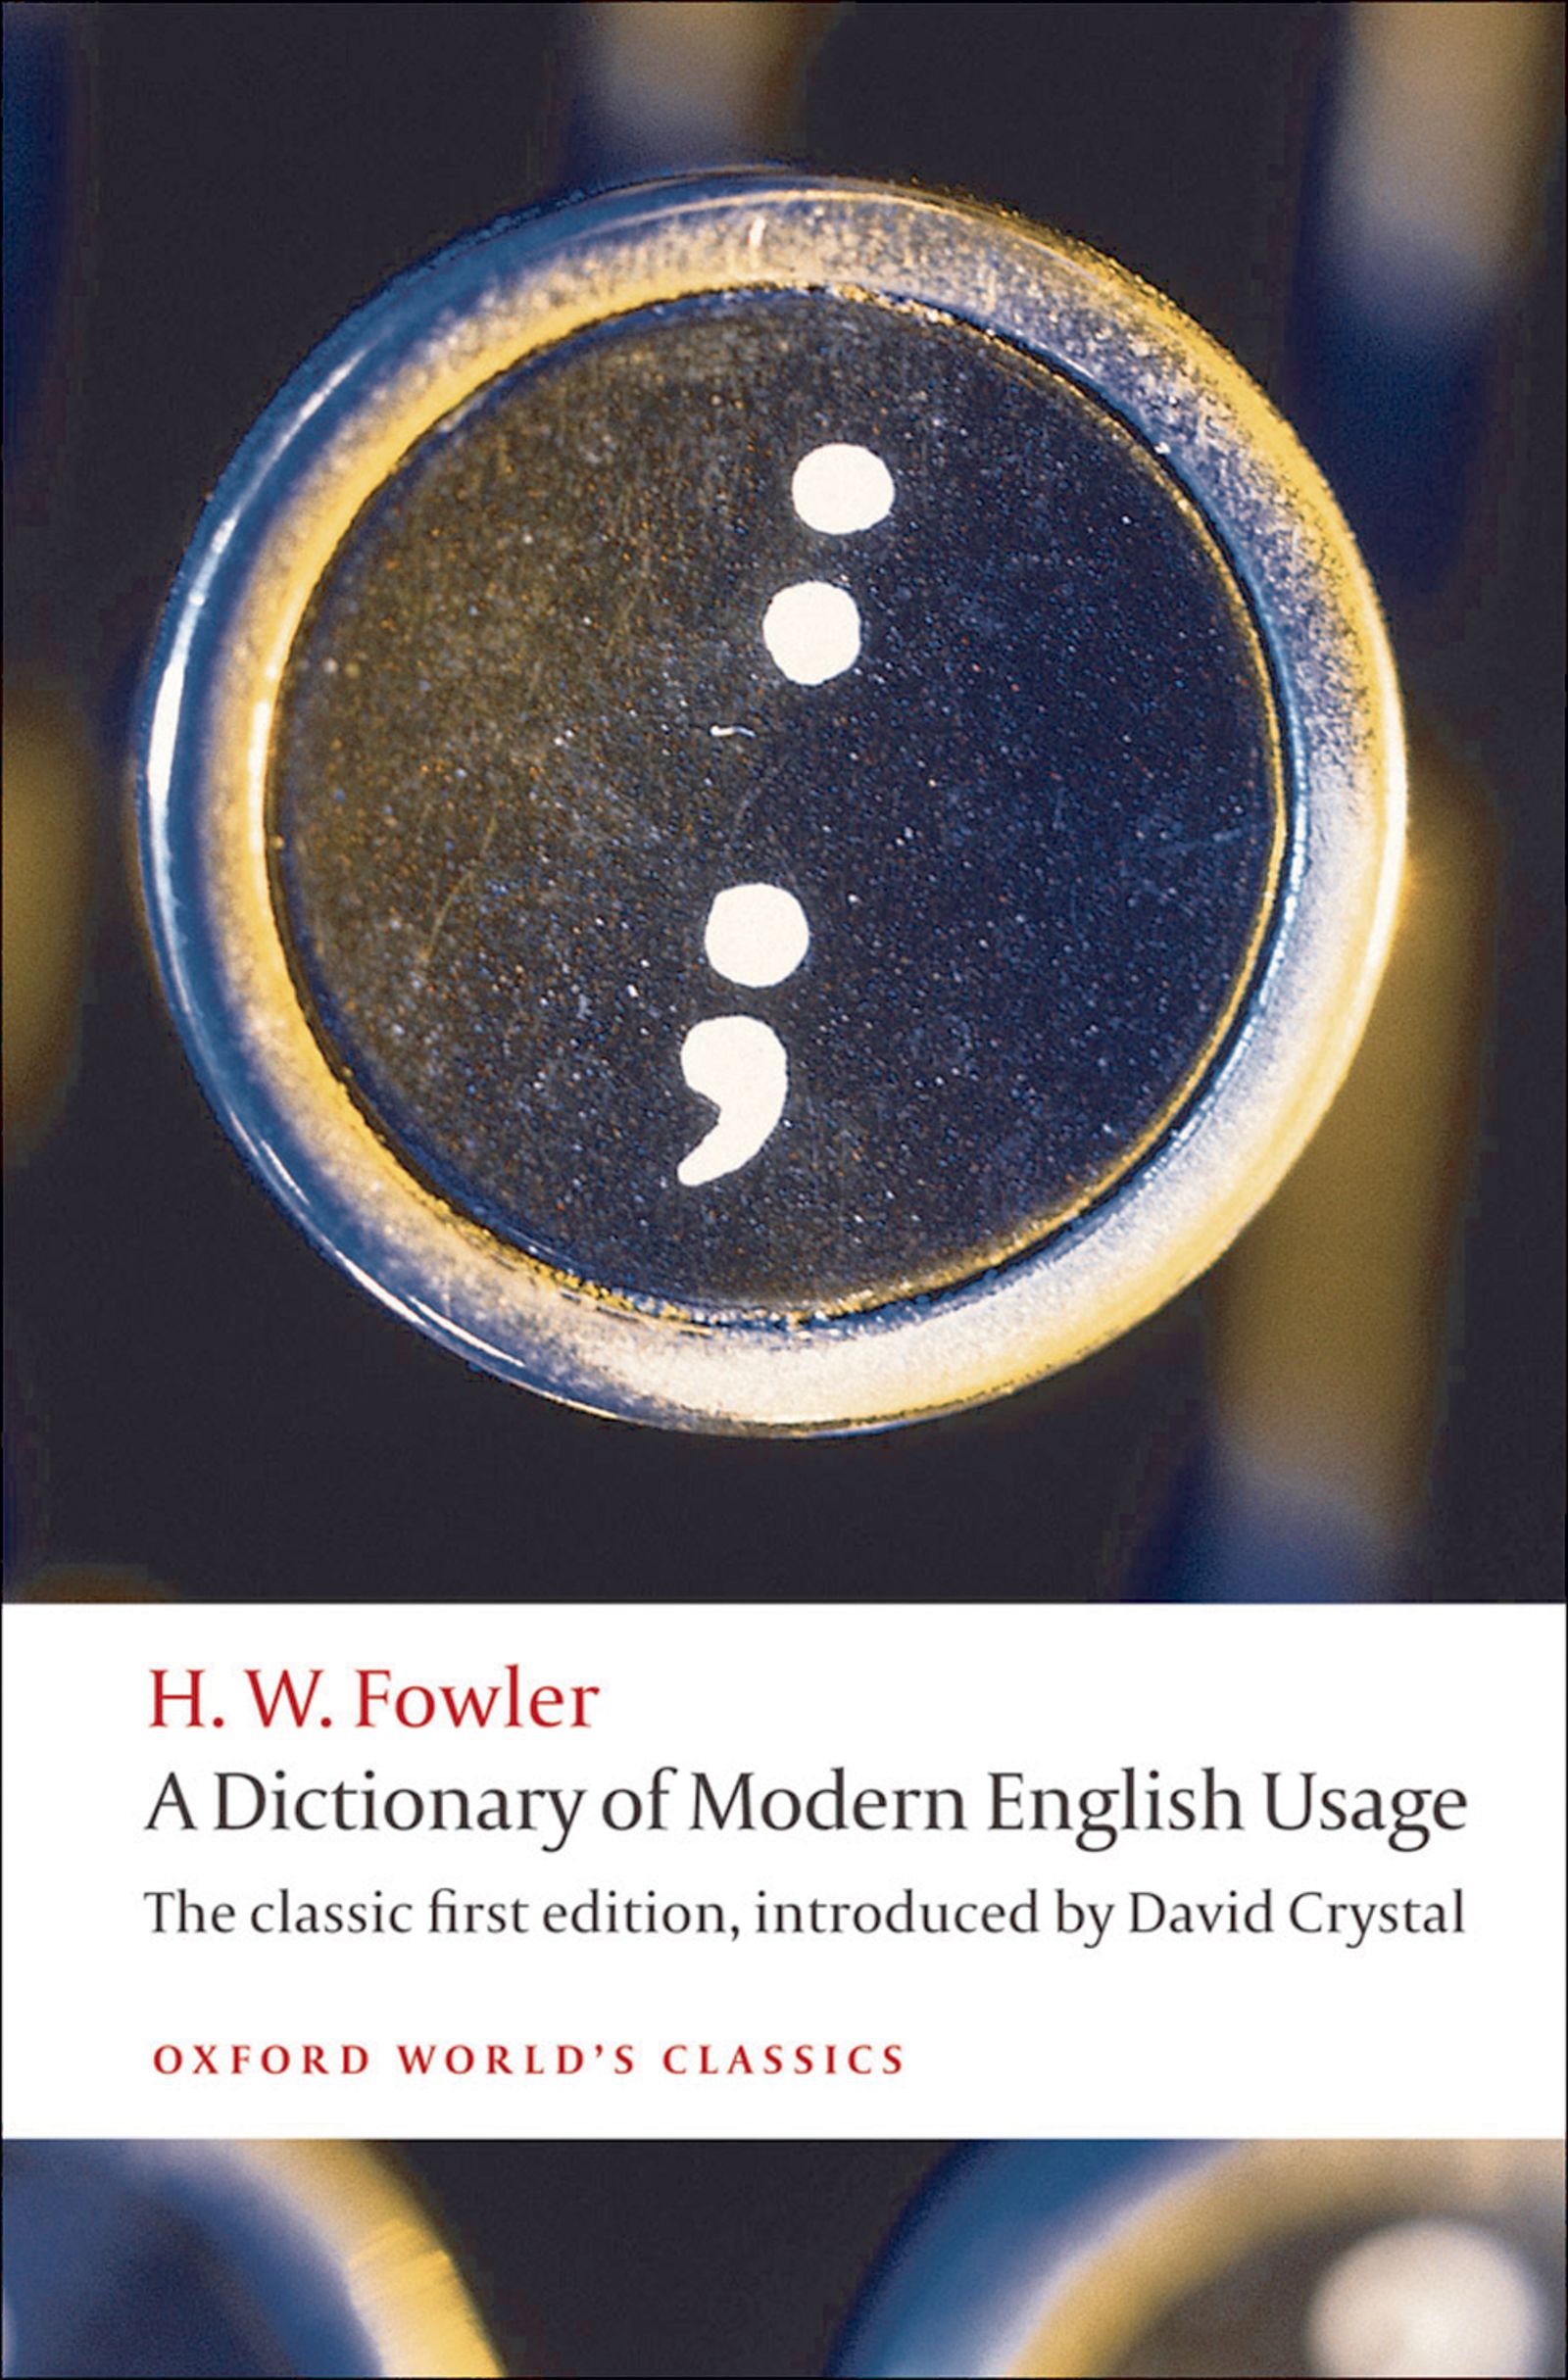 A Dictionary of Modern English Usage - 10-14.99